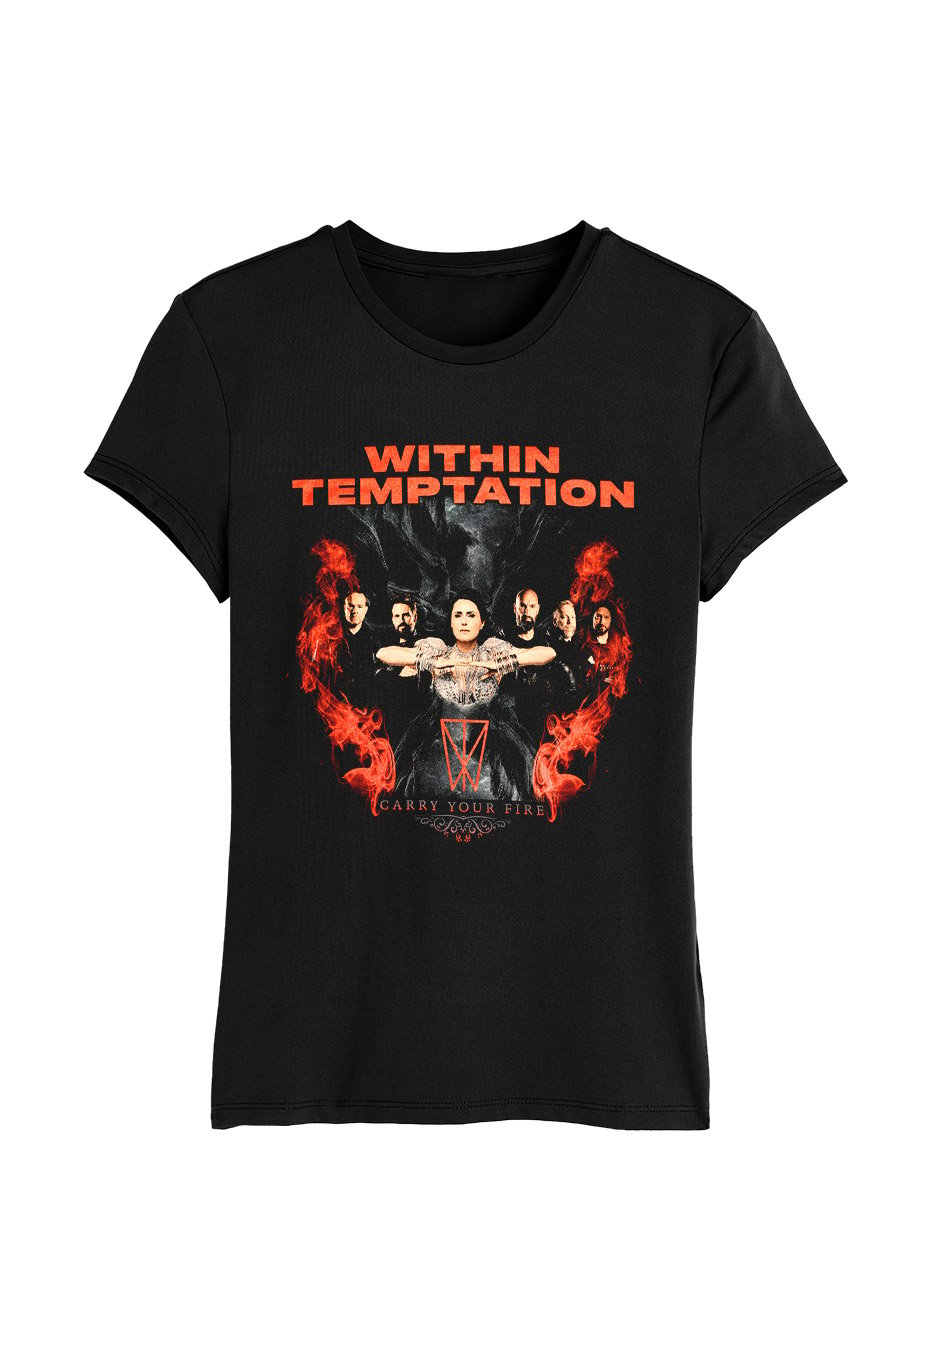 Within Temptation - Carry Fire Tour 2022 - Girly